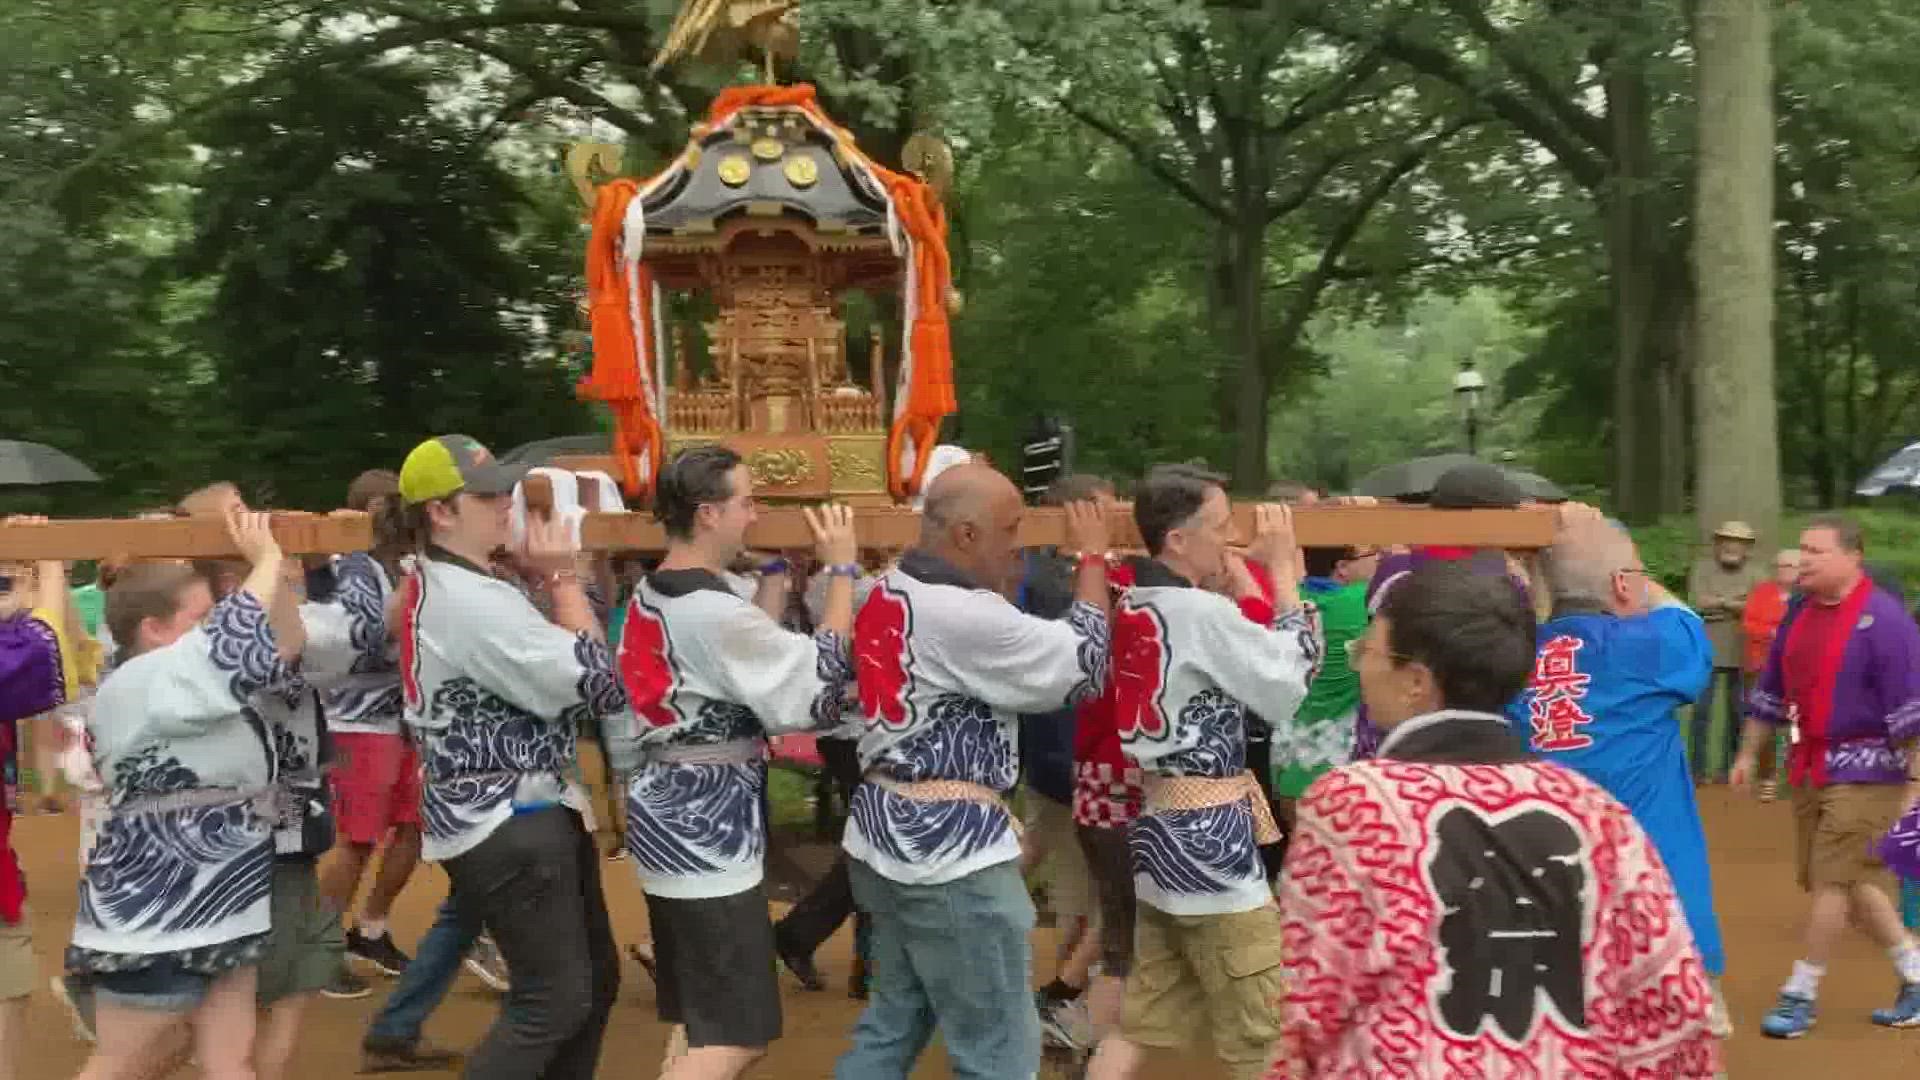 One of the largest and oldest Japanese Festivals returned to the Missouri Botanical Garden this weekend. It’s home to one of the largest Japanese gardens in the U.S.